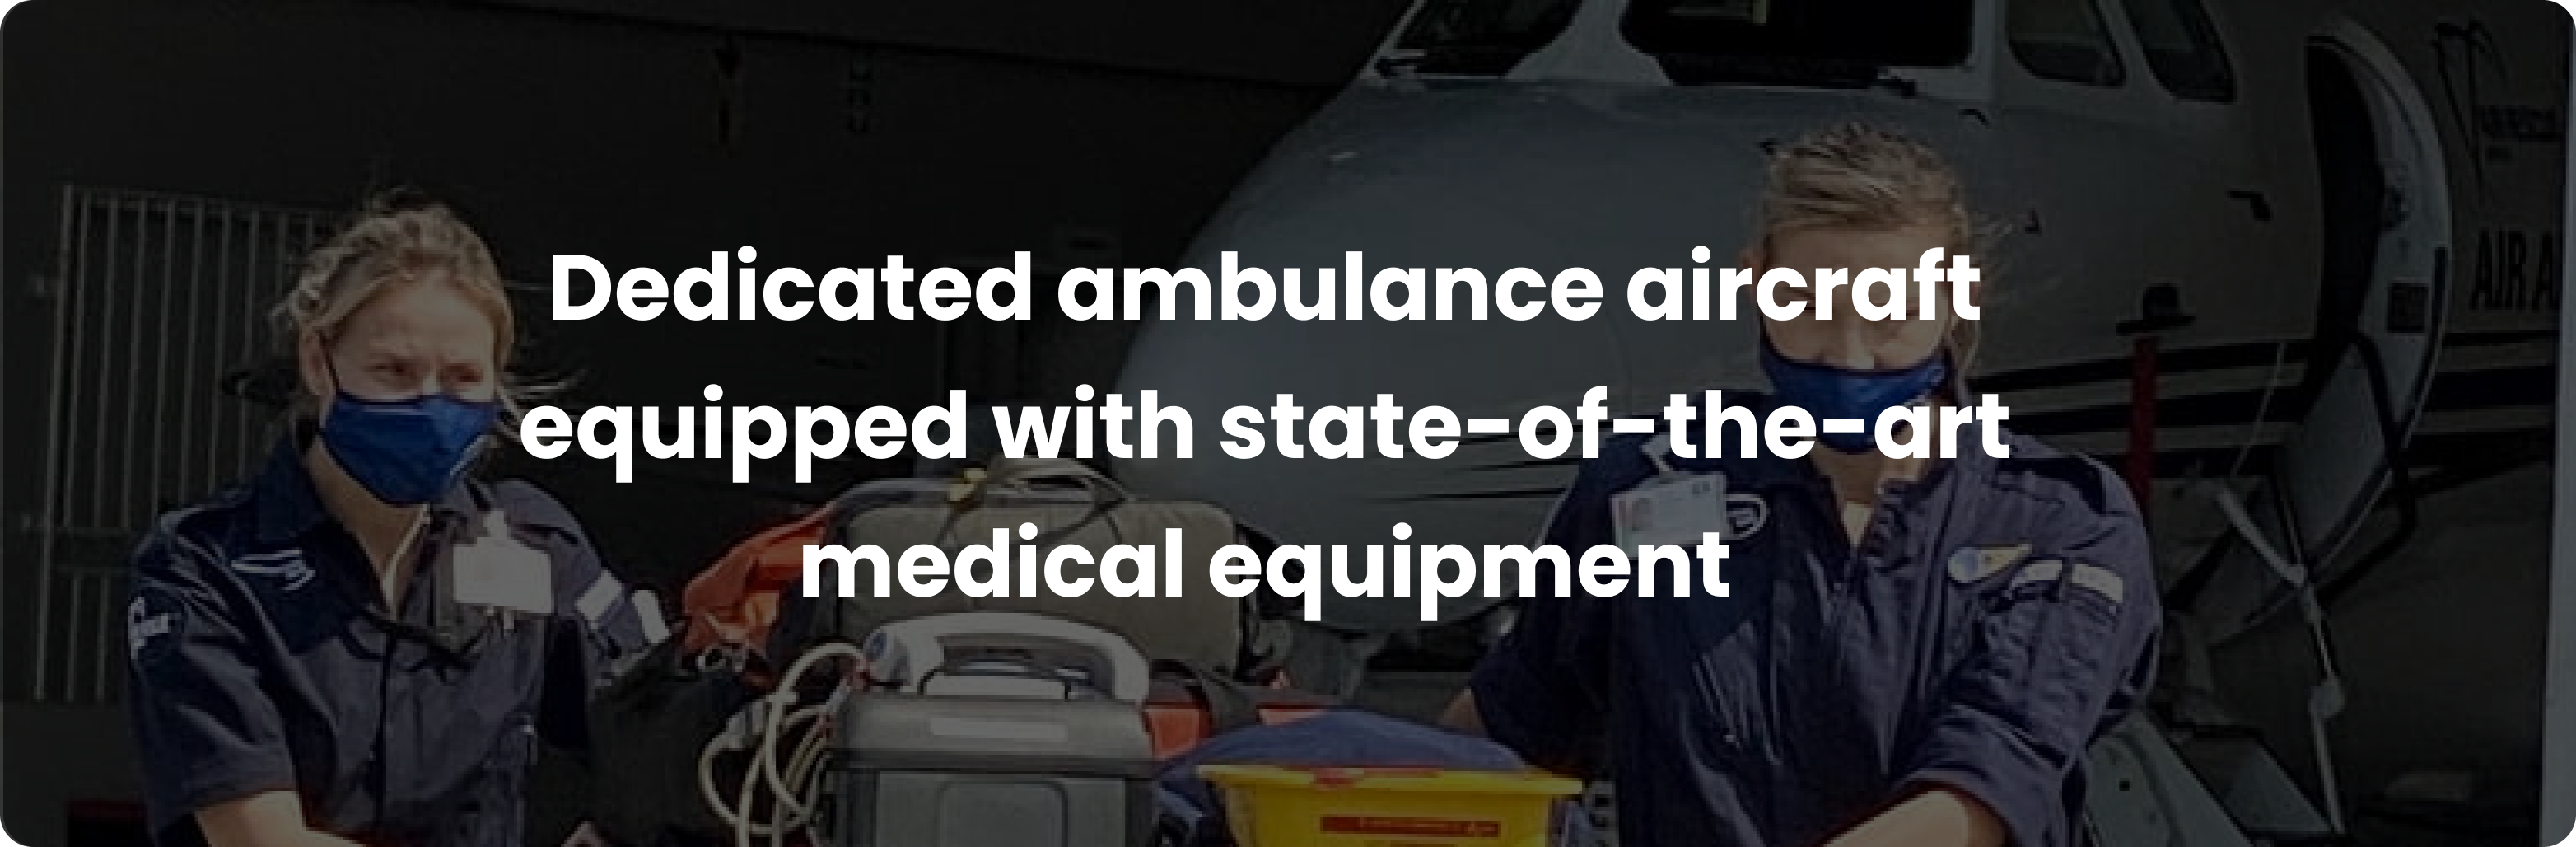 Dedicated ambulance aircraft equipped with state-of-the-art medical equipment